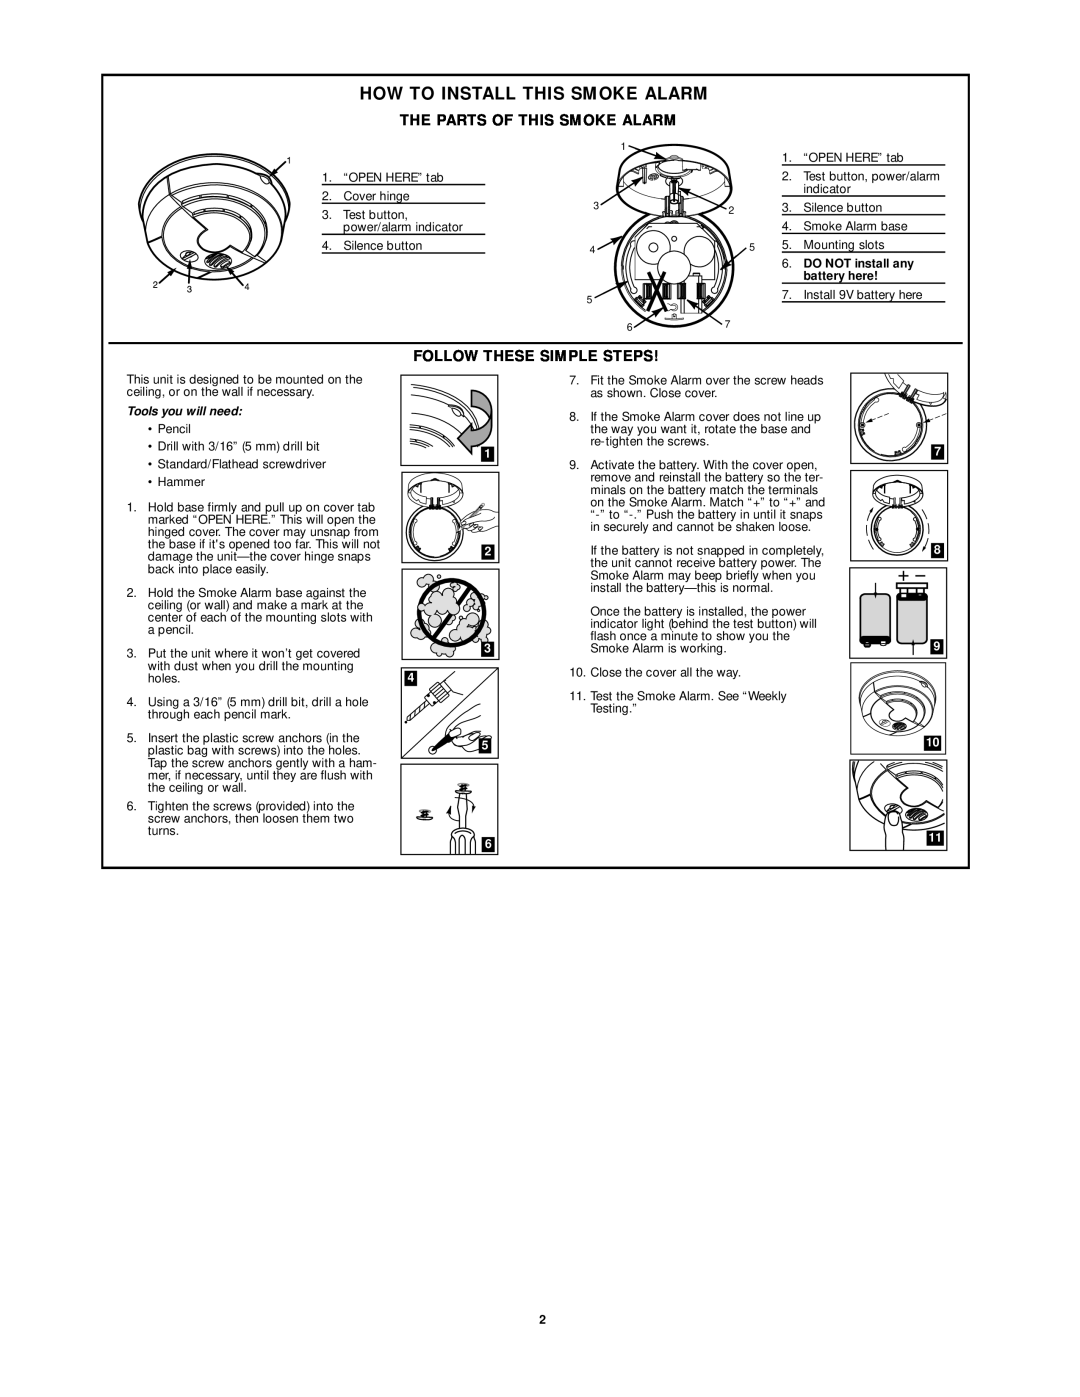 First Alert SA97CN, SA87CN How To Install This Smoke Alarm, The Parts Of This Smoke Alarm, Follow These Simple Steps 